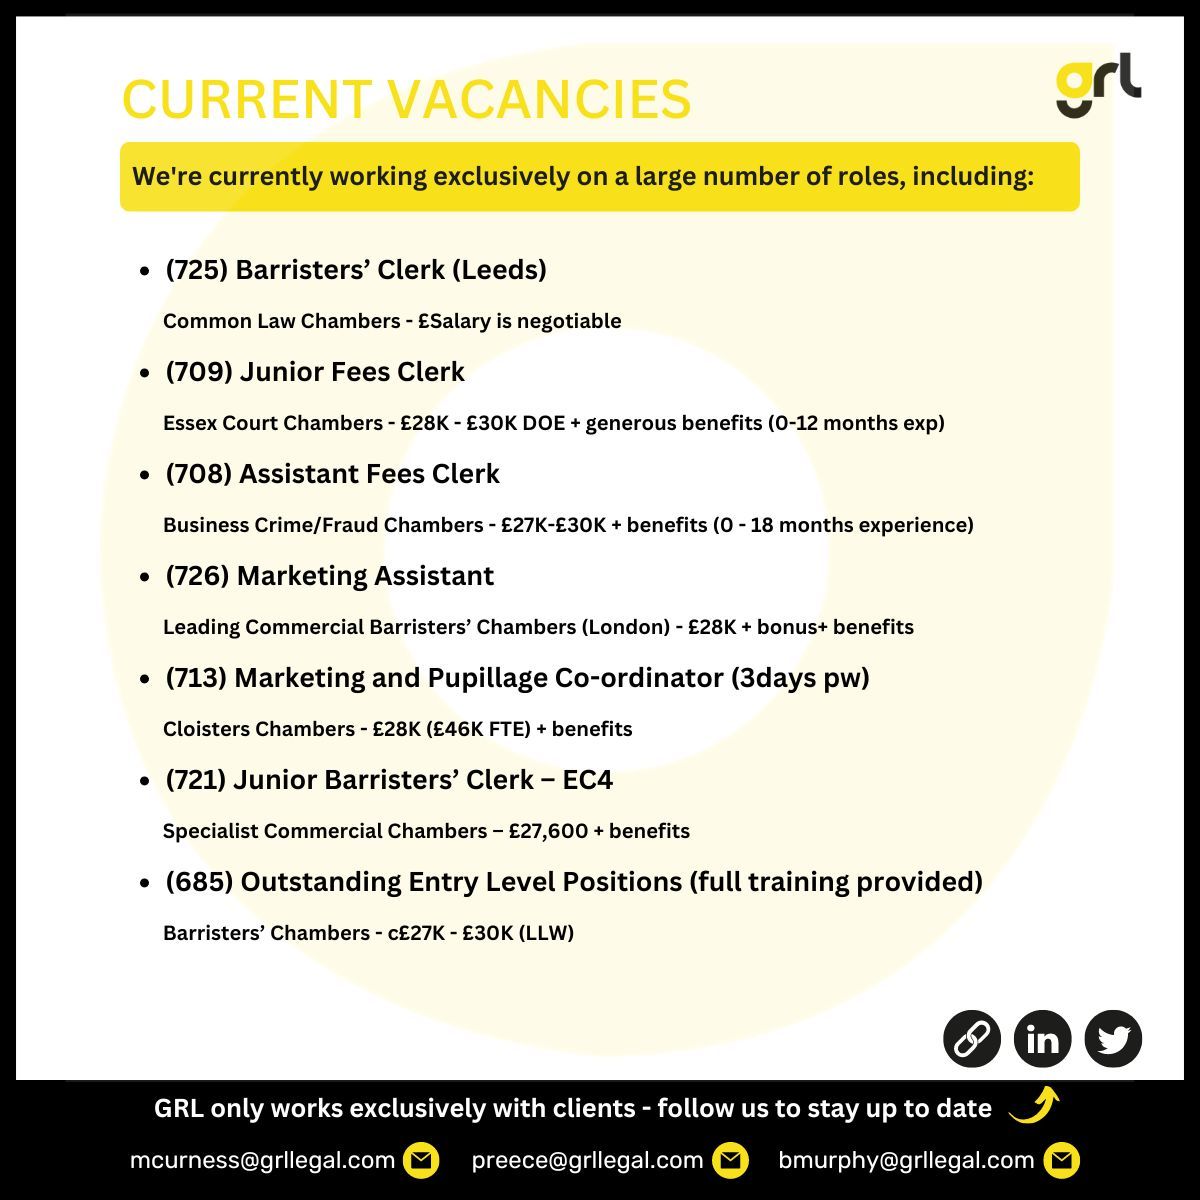 GRL bring you exciting opportunities for #legalcareer advancement across the UK. We have a number of legal recruitment #vacancies at Leading Organisations. Our current vacancies are here. Full advertisements on our website. 

Send your CV ⬇️ 
📧 recruitment@grllegal.com